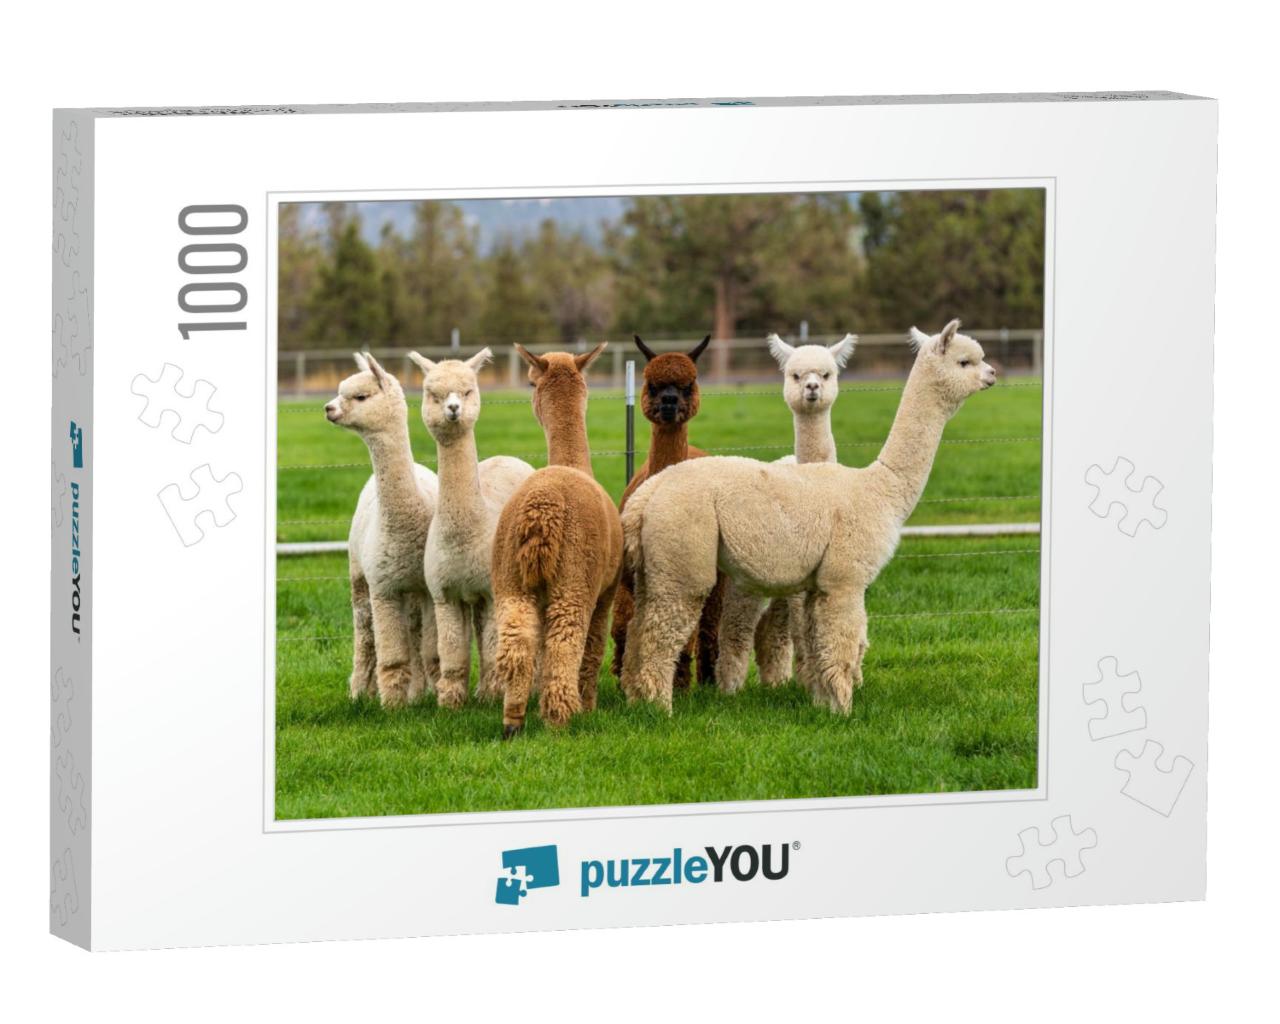 Alpacas on a Ranch on a Farm in a Field in Oregon... Jigsaw Puzzle with 1000 pieces